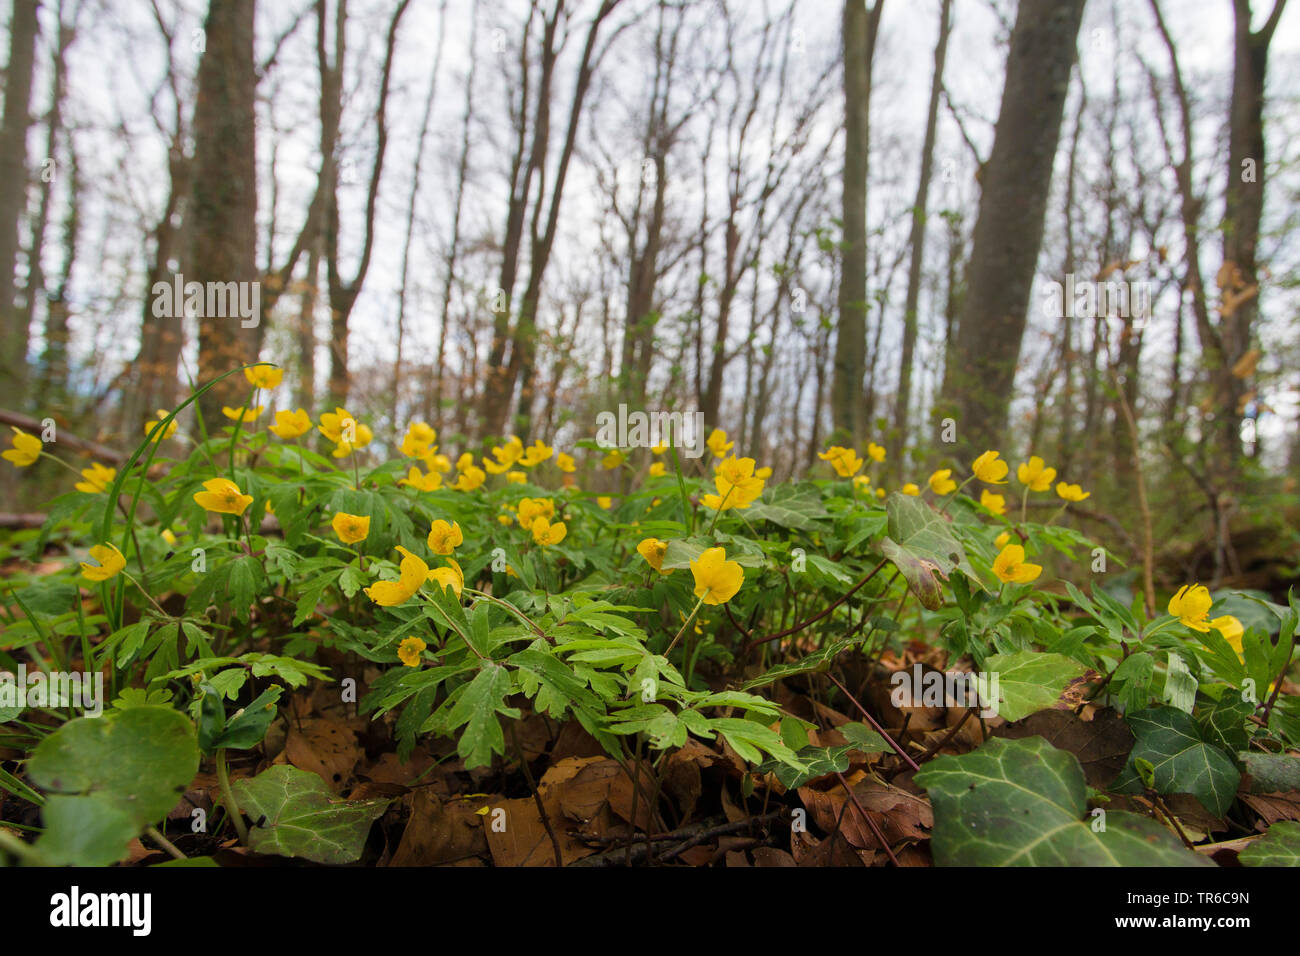 yellow anemone, yellow wood anemone, buttercup anemone (Anemone ranunculoides), blooming in a spring forest, Germany, Bavaria Stock Photo